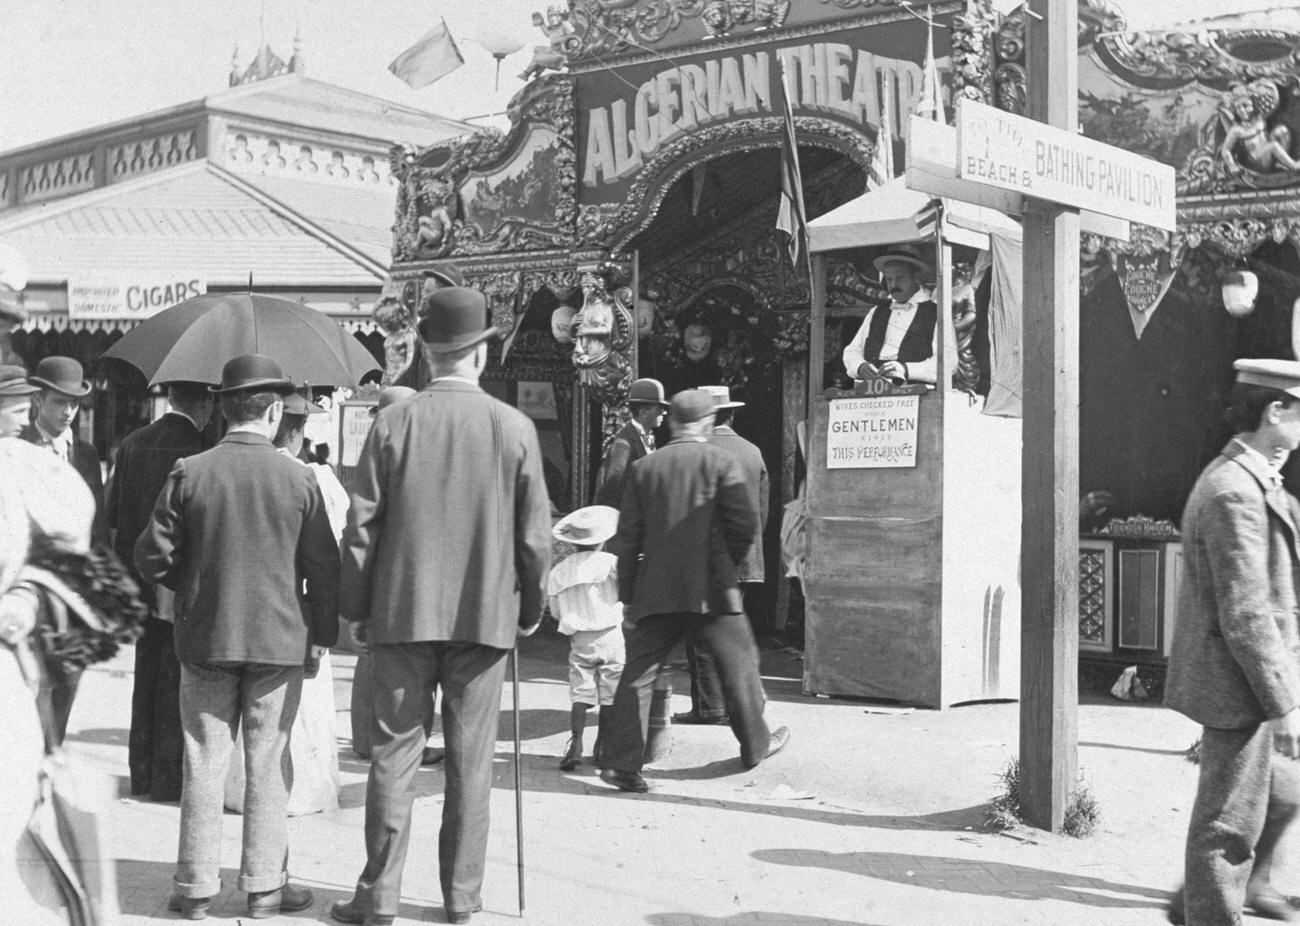 Ticket Booth For The Algerian Theatre At Coney Island, Brooklyn, 1896